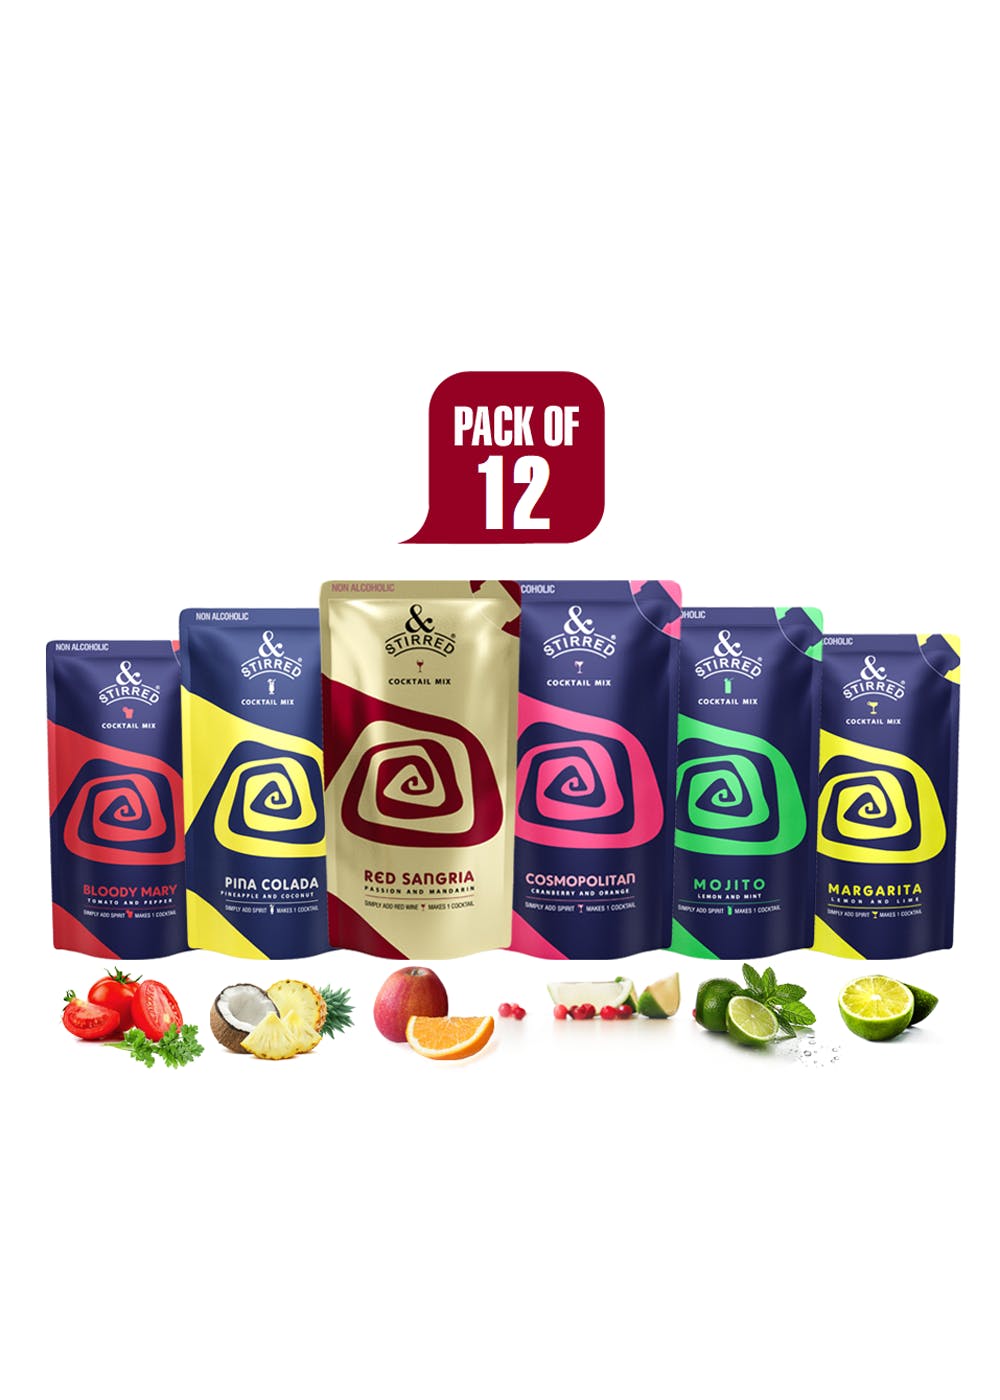 Pack Of 12 (2 x 6 Flavour) - ( Mojito+Margarita+Cosmopolitan+Bloody Mary+Pina Colada+ Red Sangria)